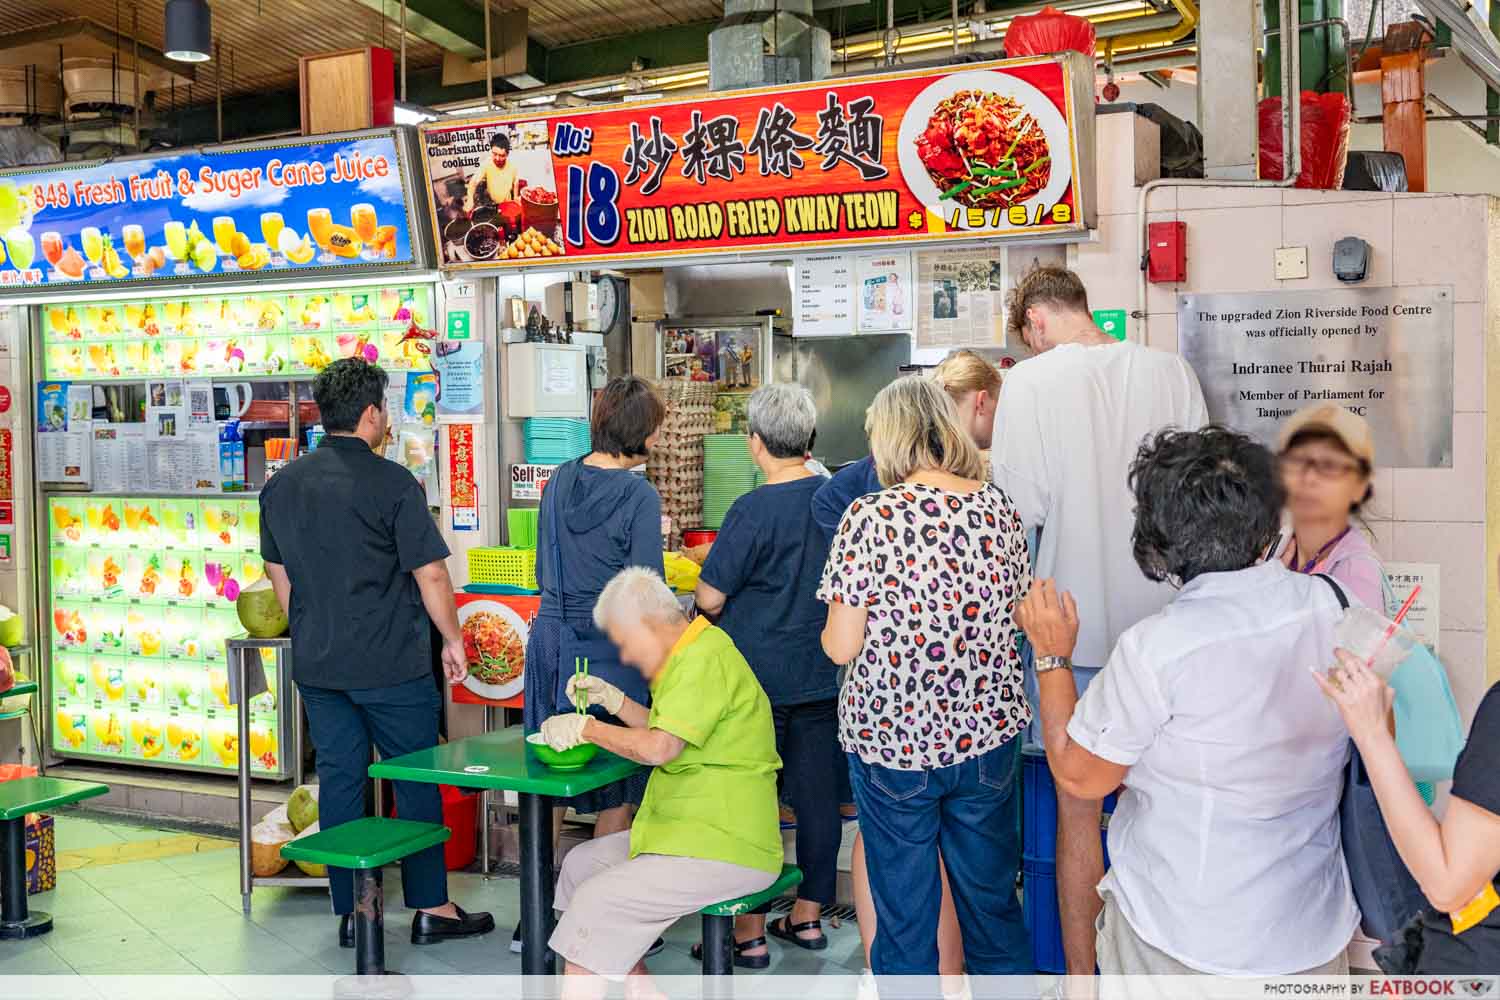 no. 18 zion road fried kway teow stall front